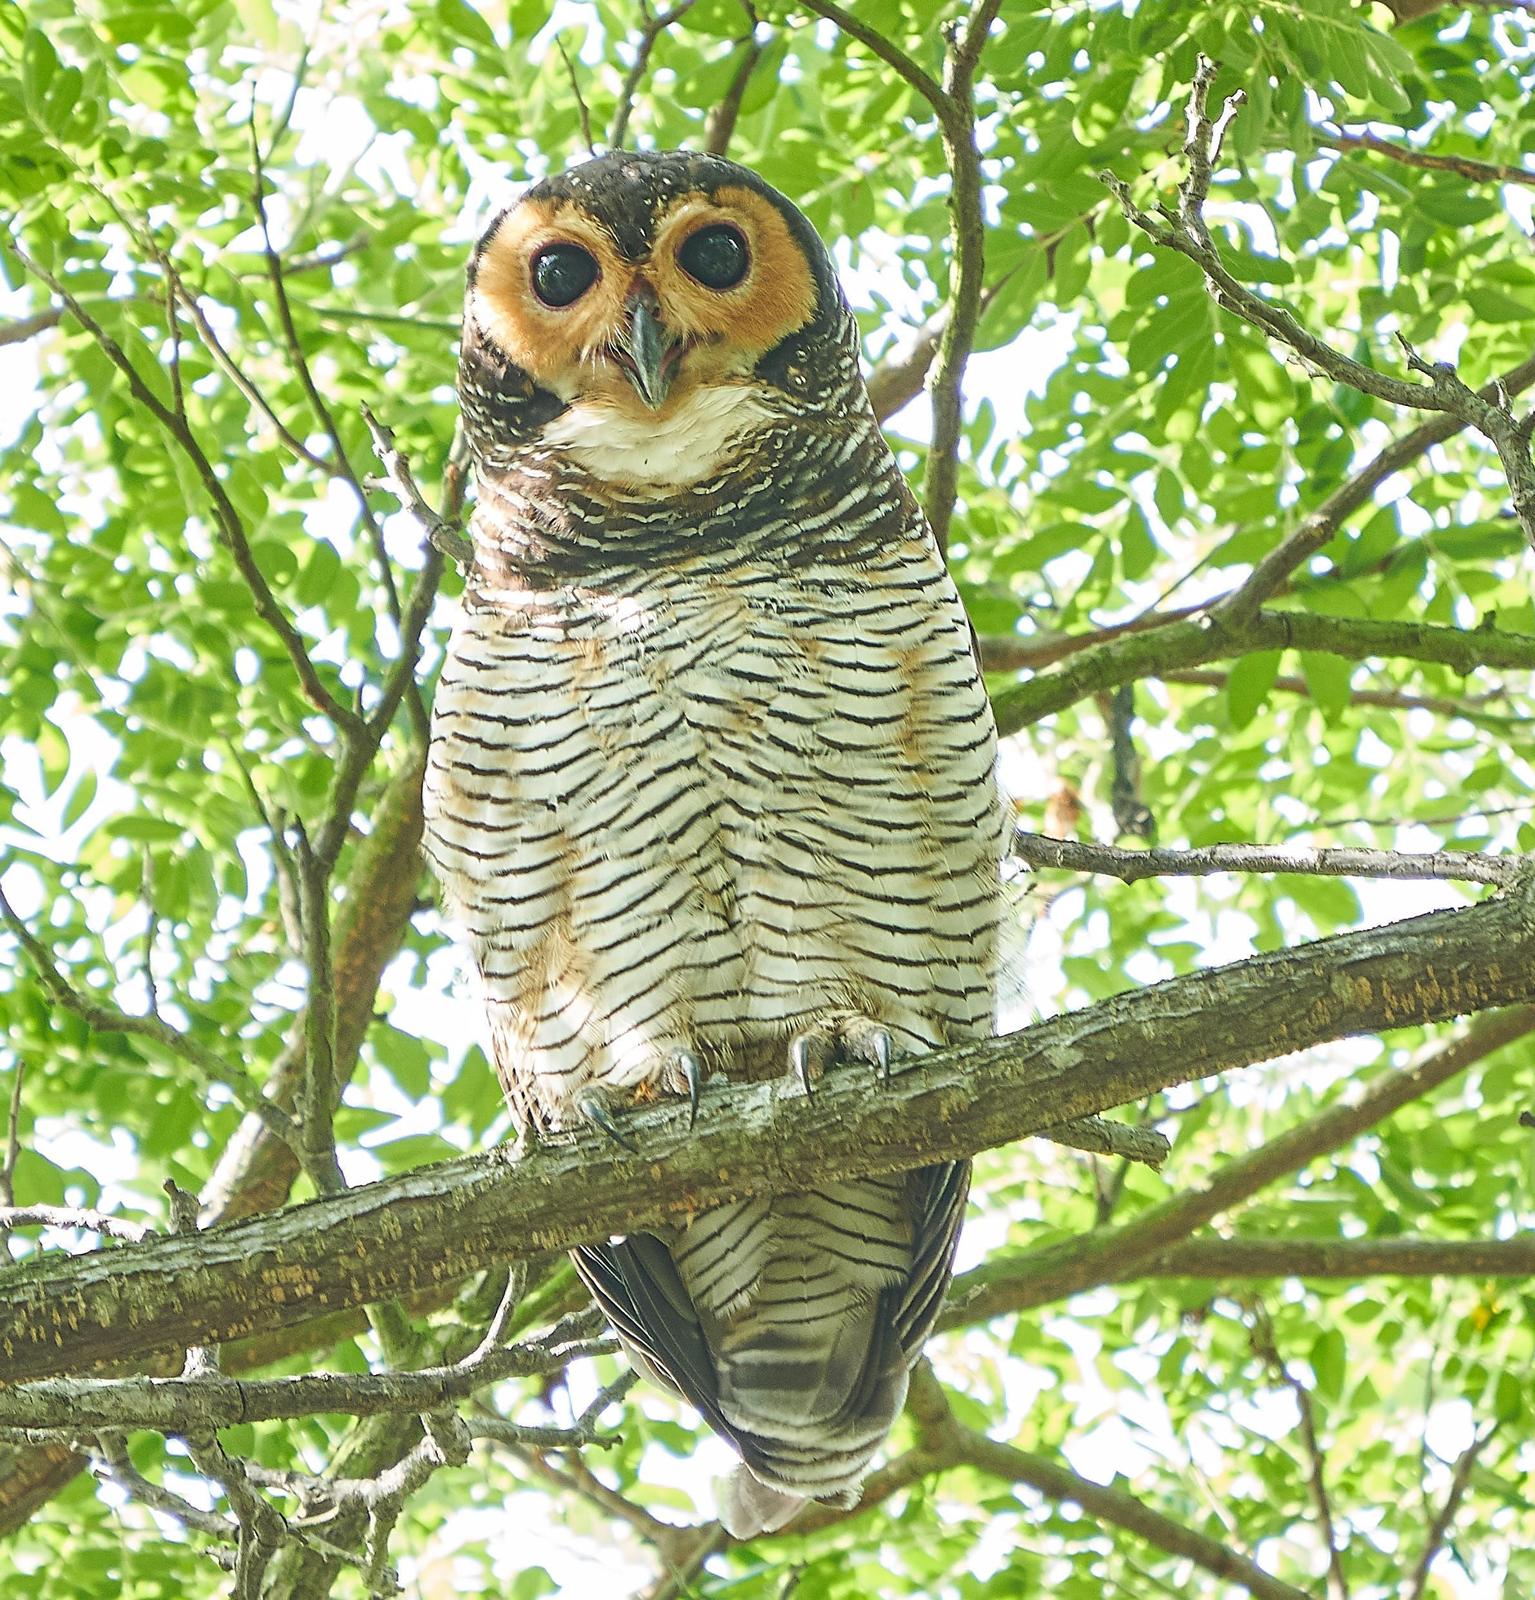 Spotted Wood-Owl Photo by Steven Cheong